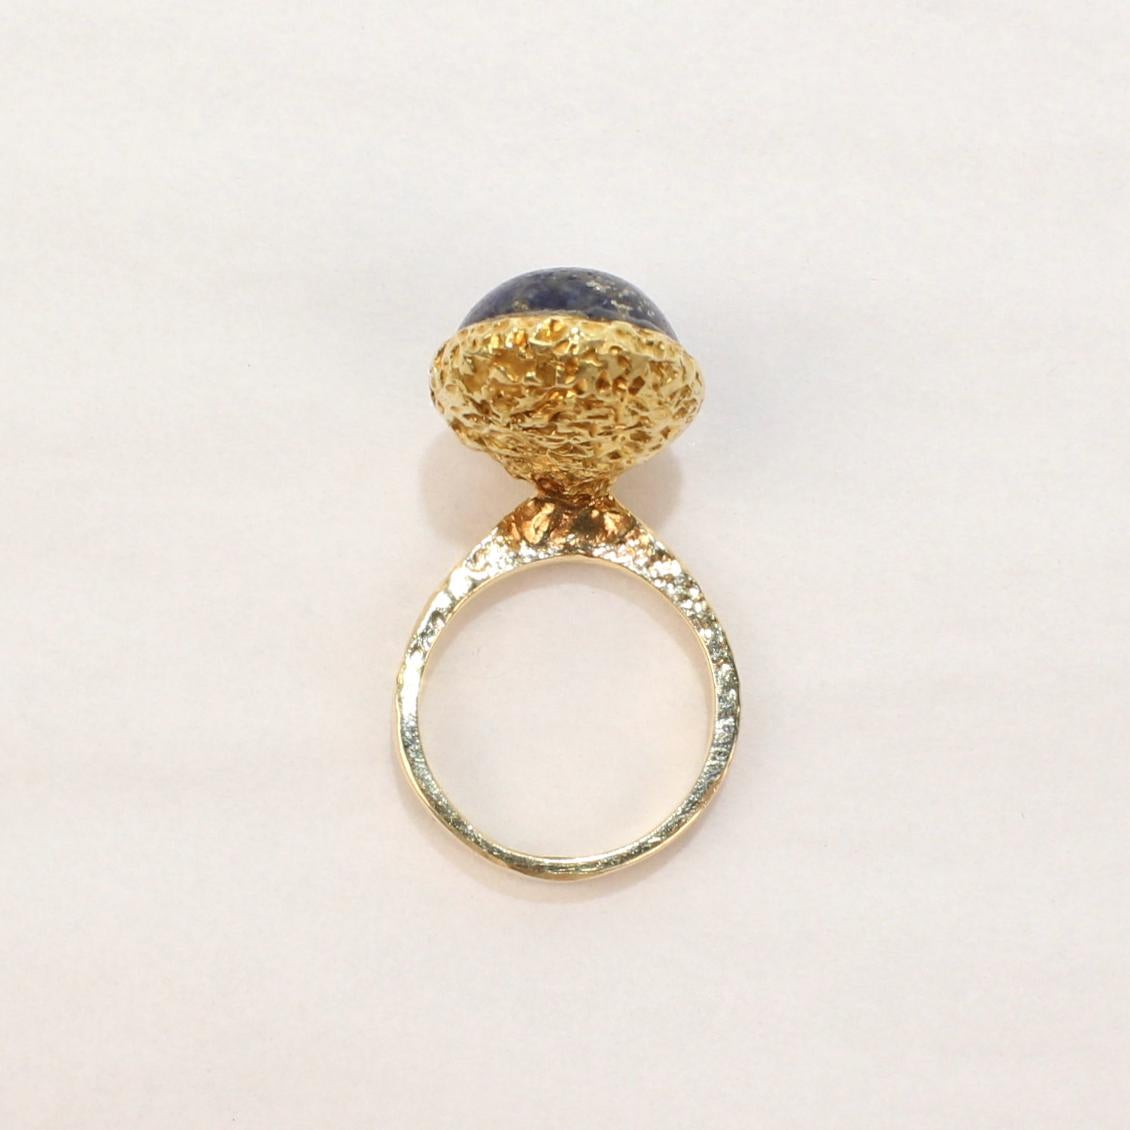 Erwin Pearl Asymmetrical Modernist 18 Karat Gold and Lapis Lazuli Cocktail Ring For Sale 2